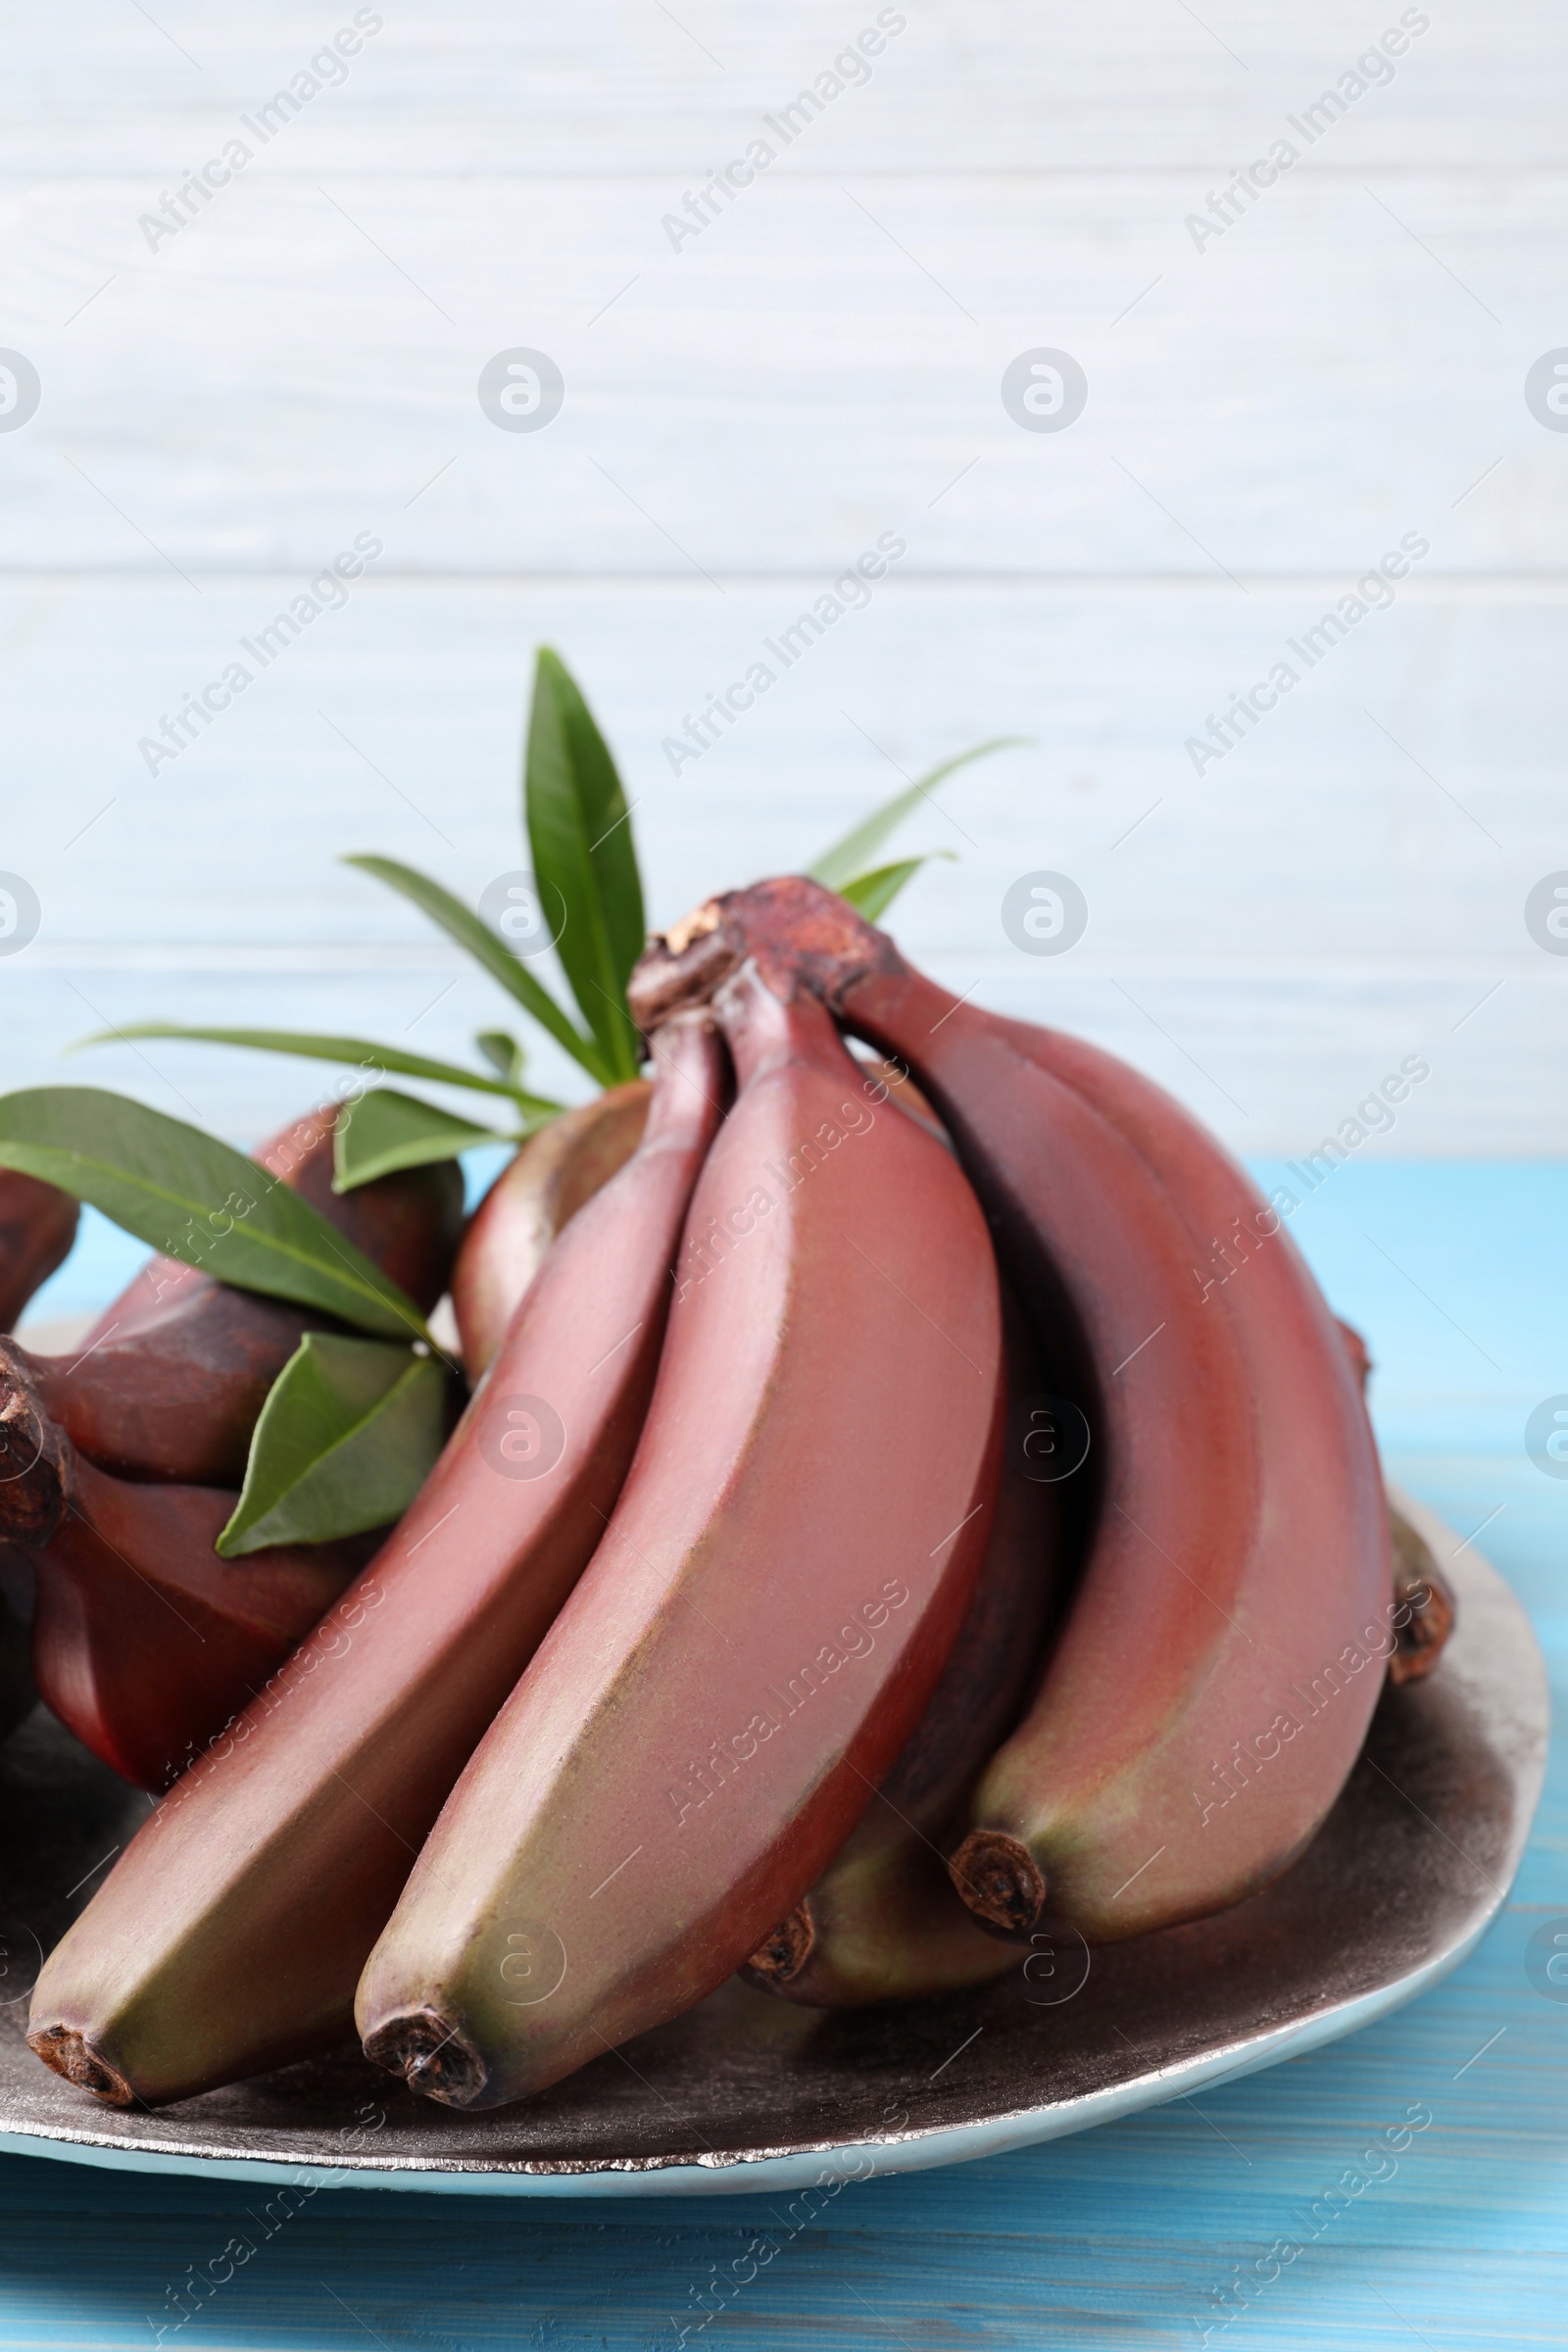 Photo of Tasty red baby bananas on light blue table, closeup